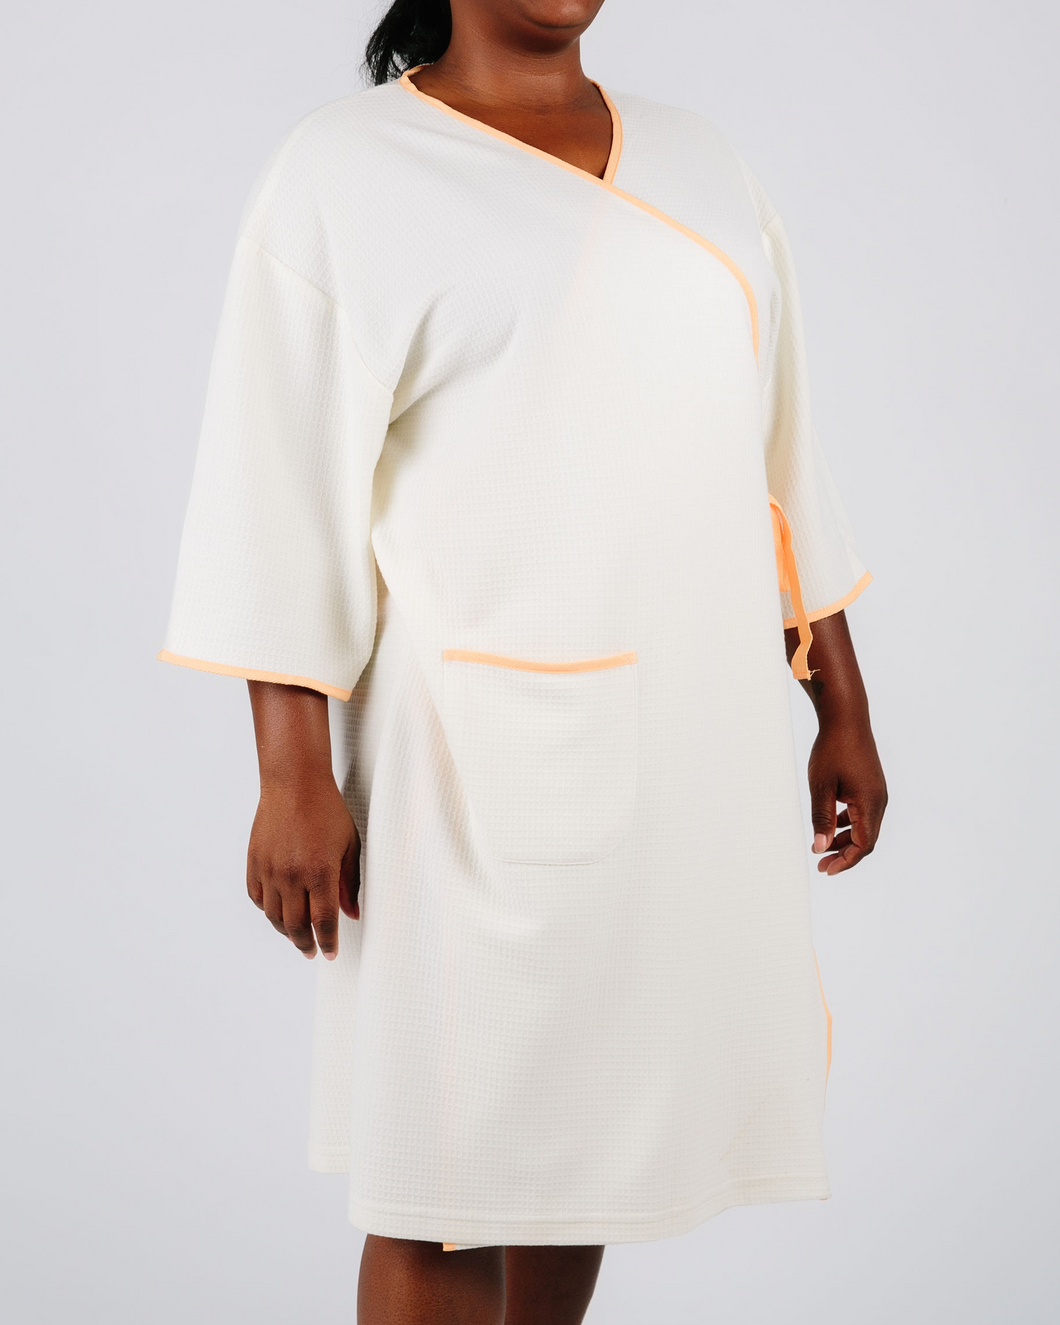 Plus-Size Luxury Hospital Gowns